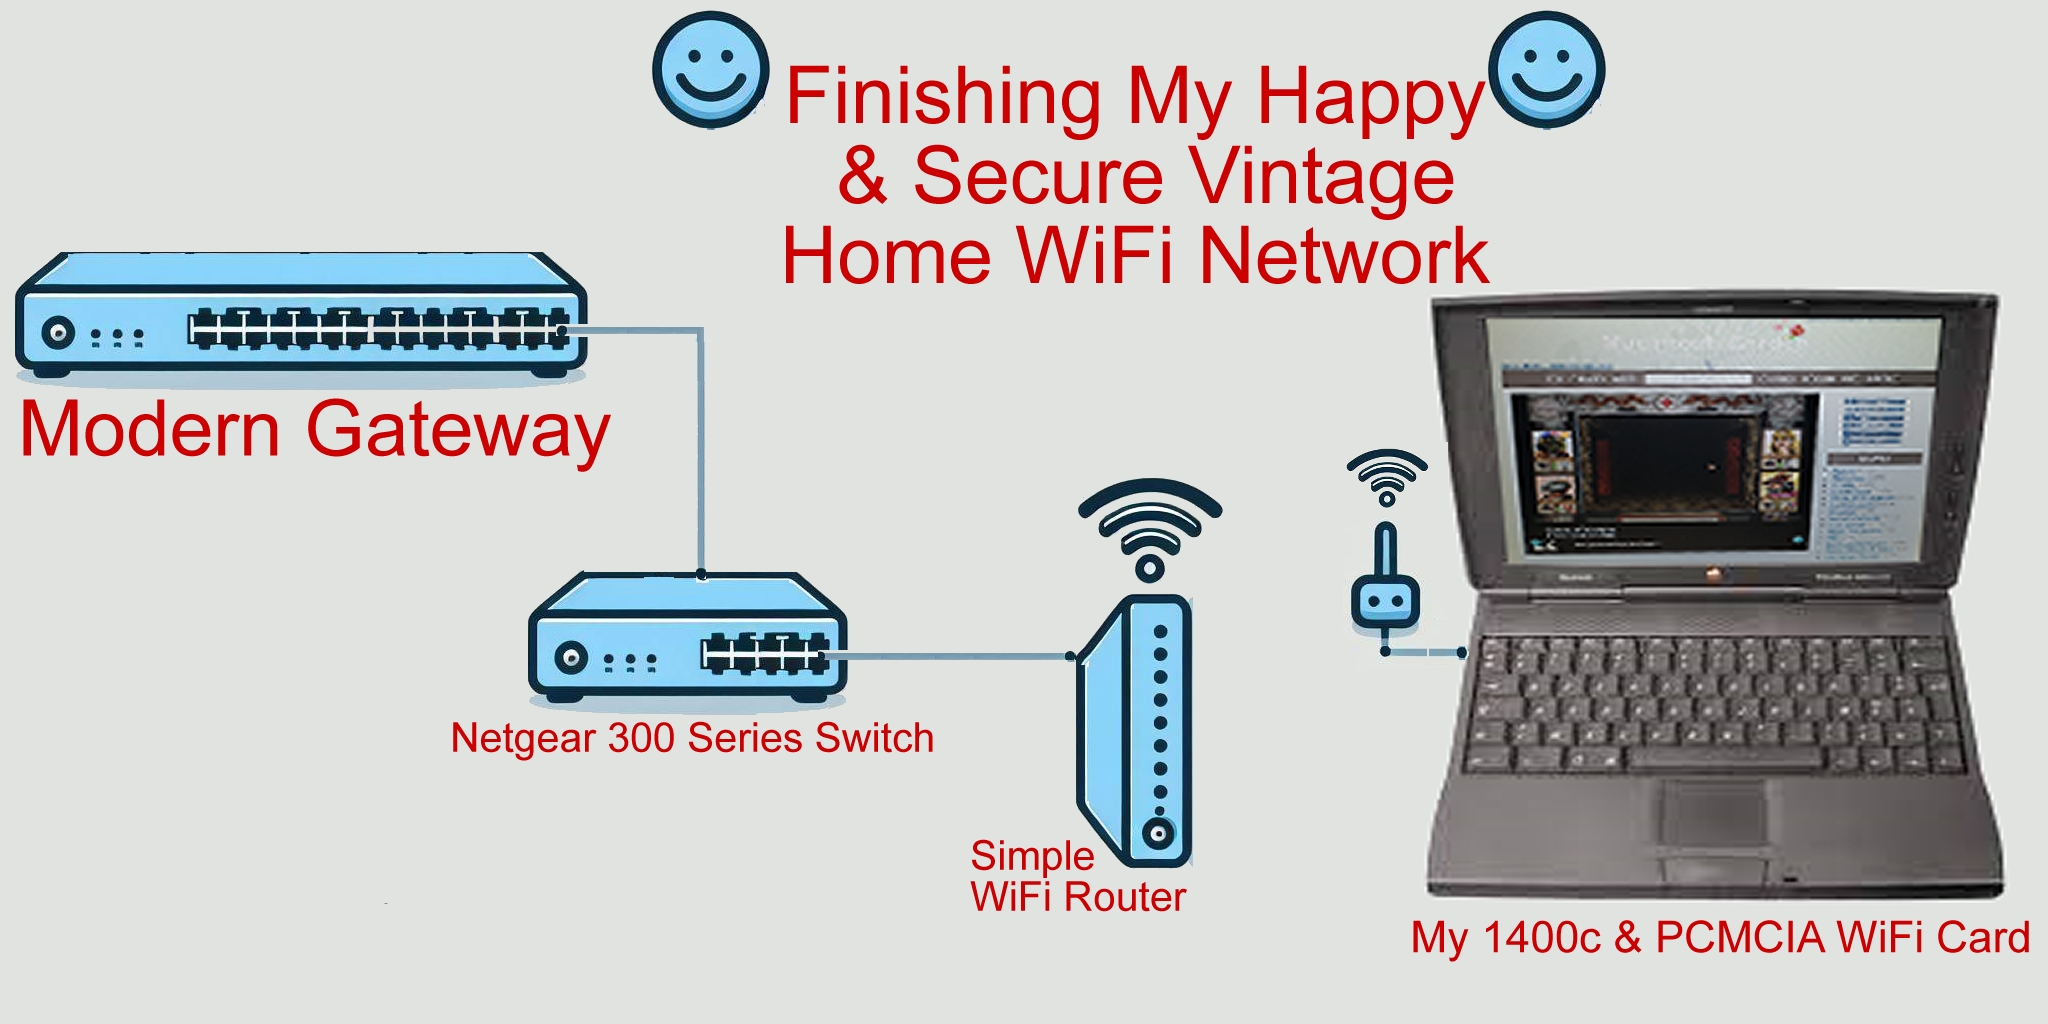 ComputerHobbyShop Simple Vintage Usable Network for Safe Connections on the Internet